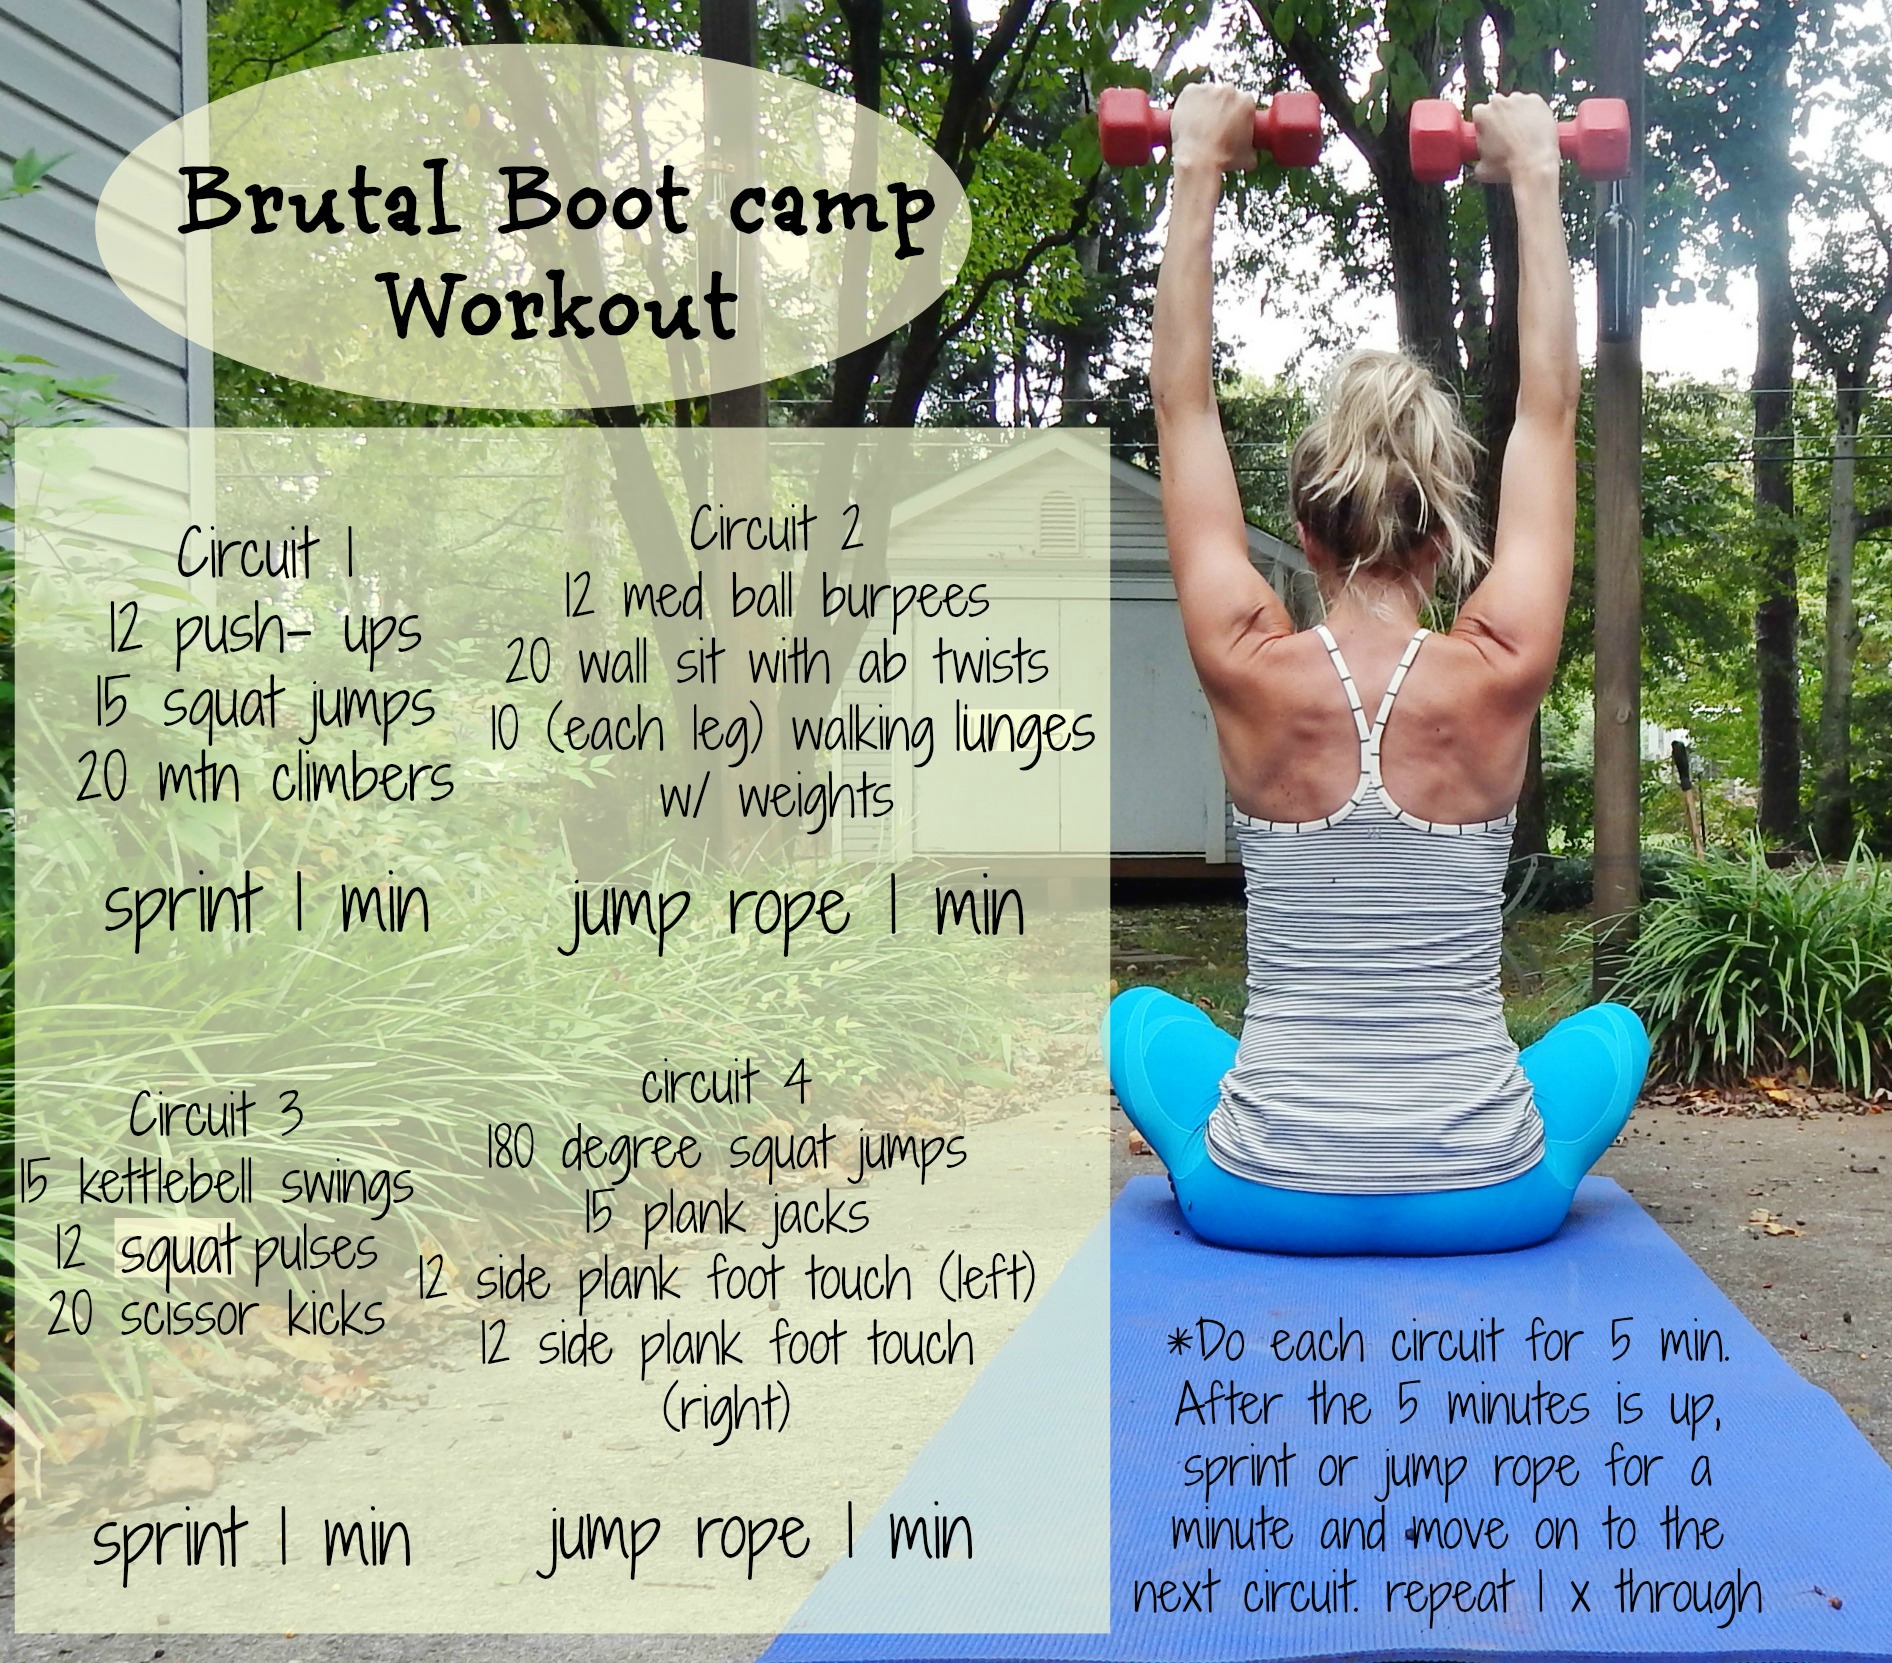 two killer boot camp workouts you can do in your backyard | mrs